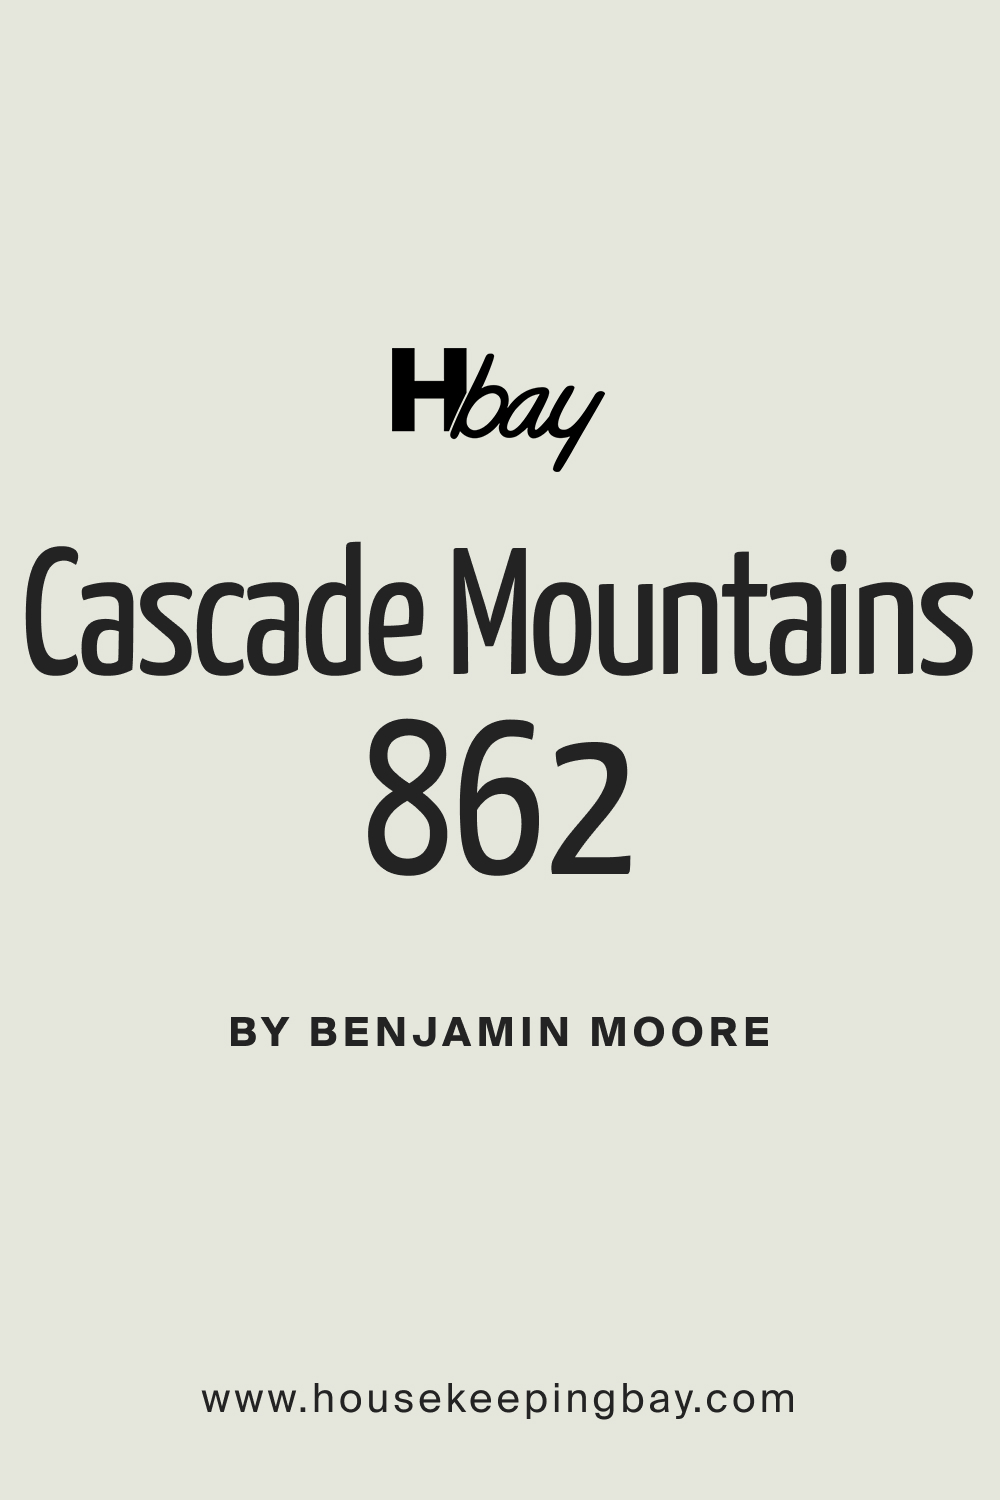 What Color Is BM Cascade Mountains 862?